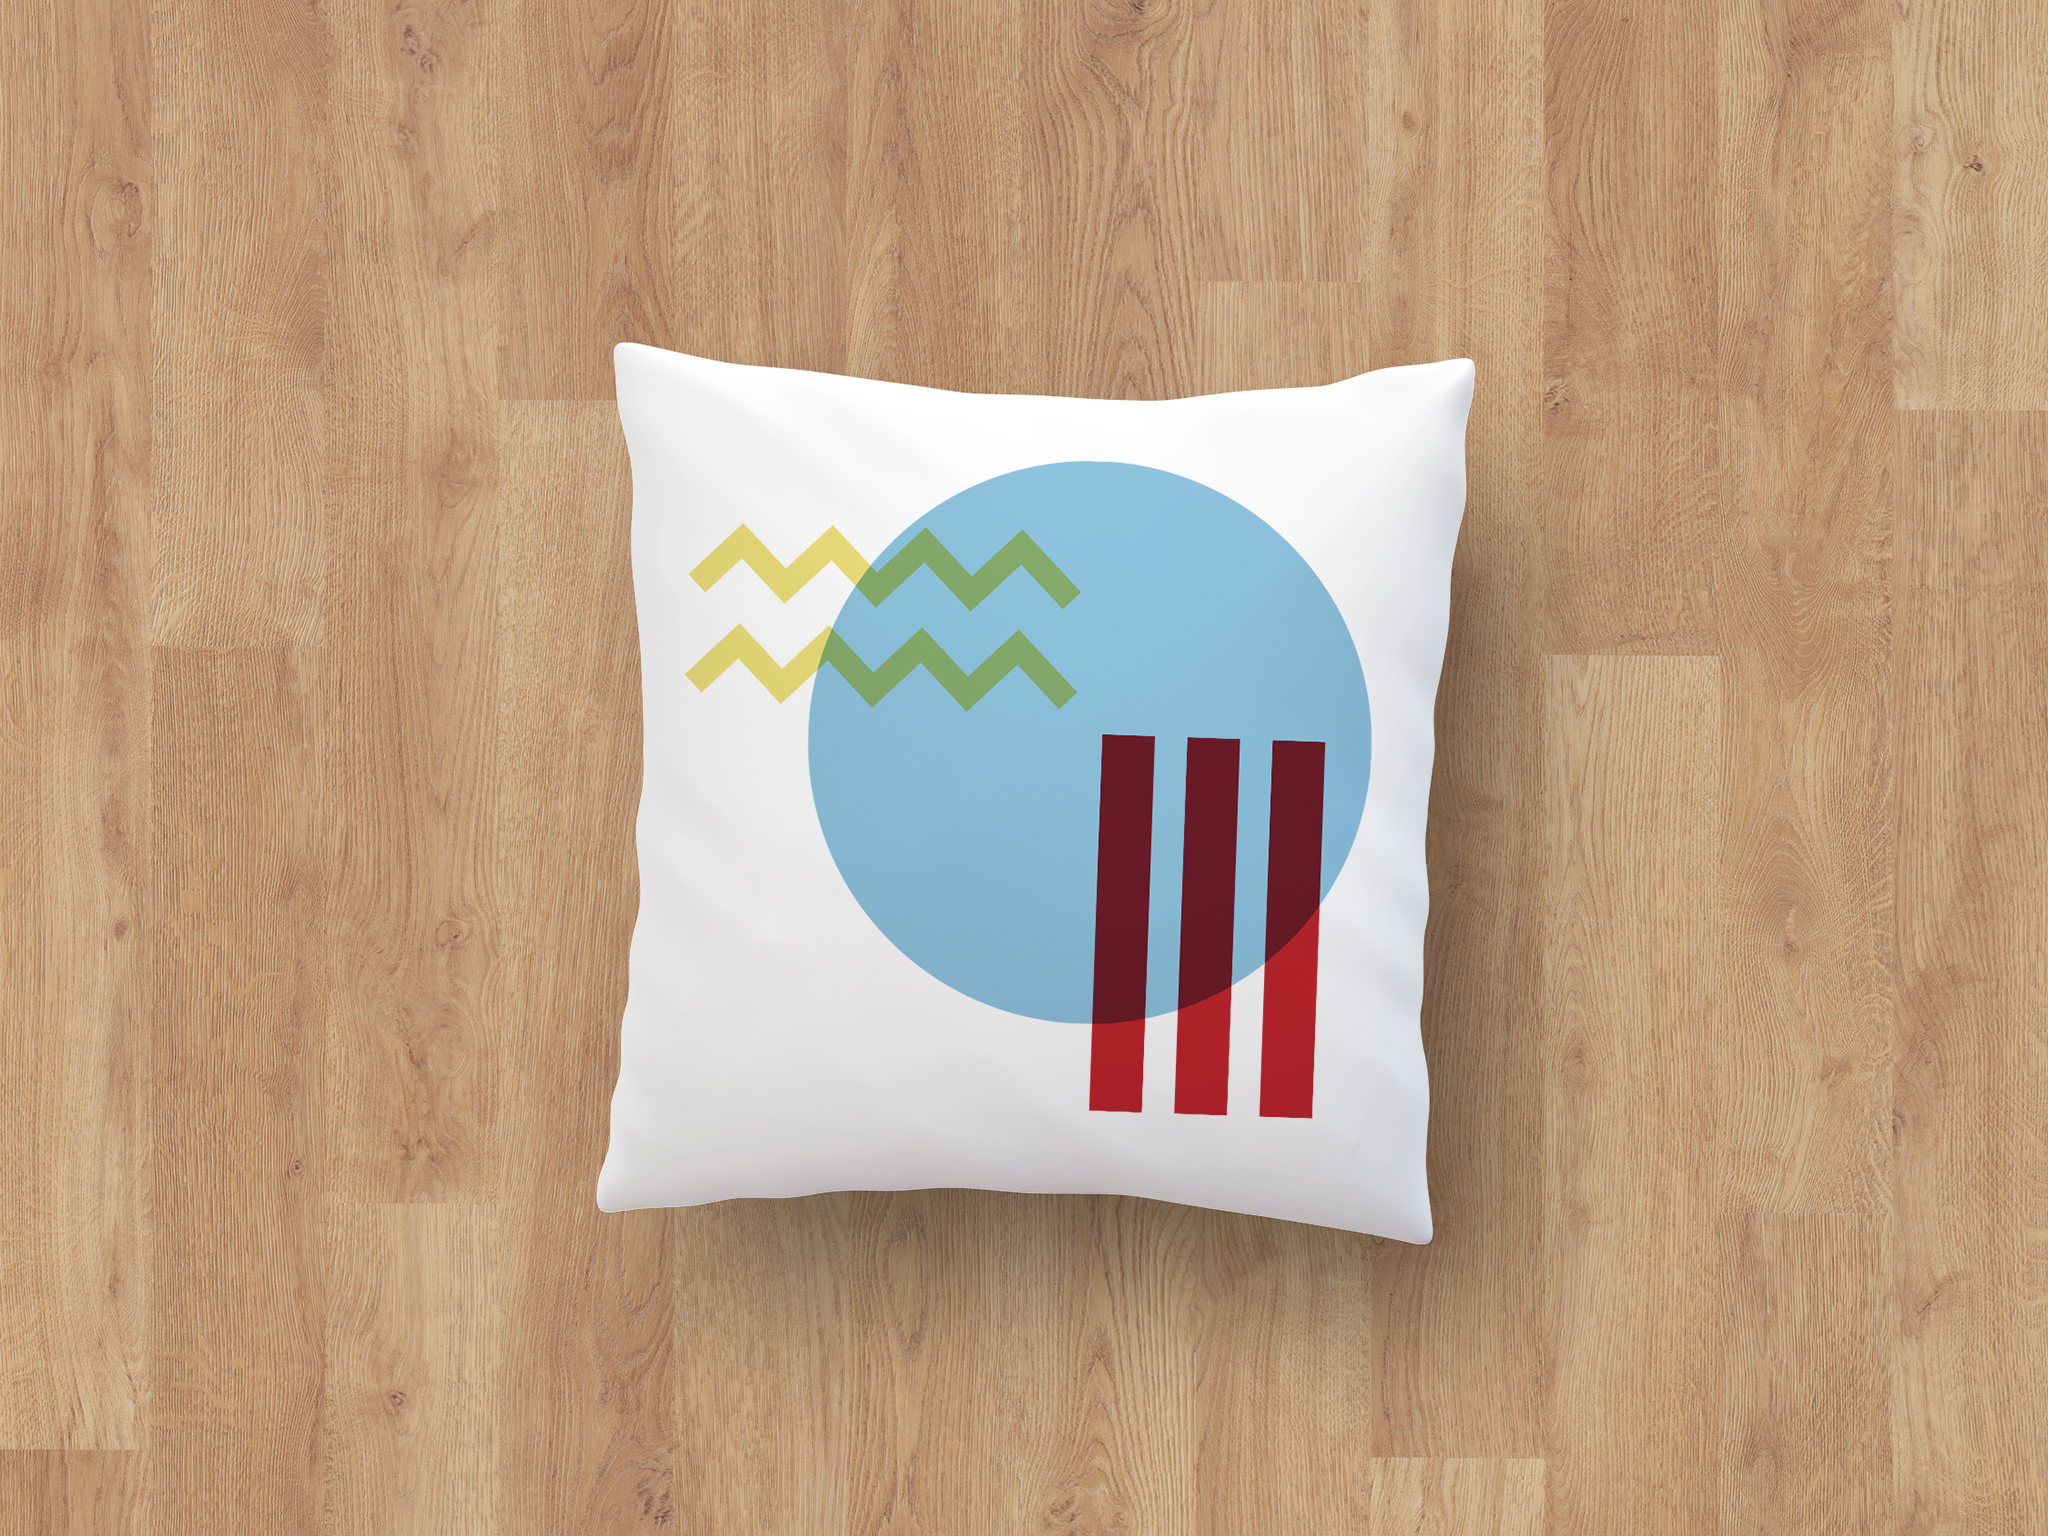 stockhome_pillow01